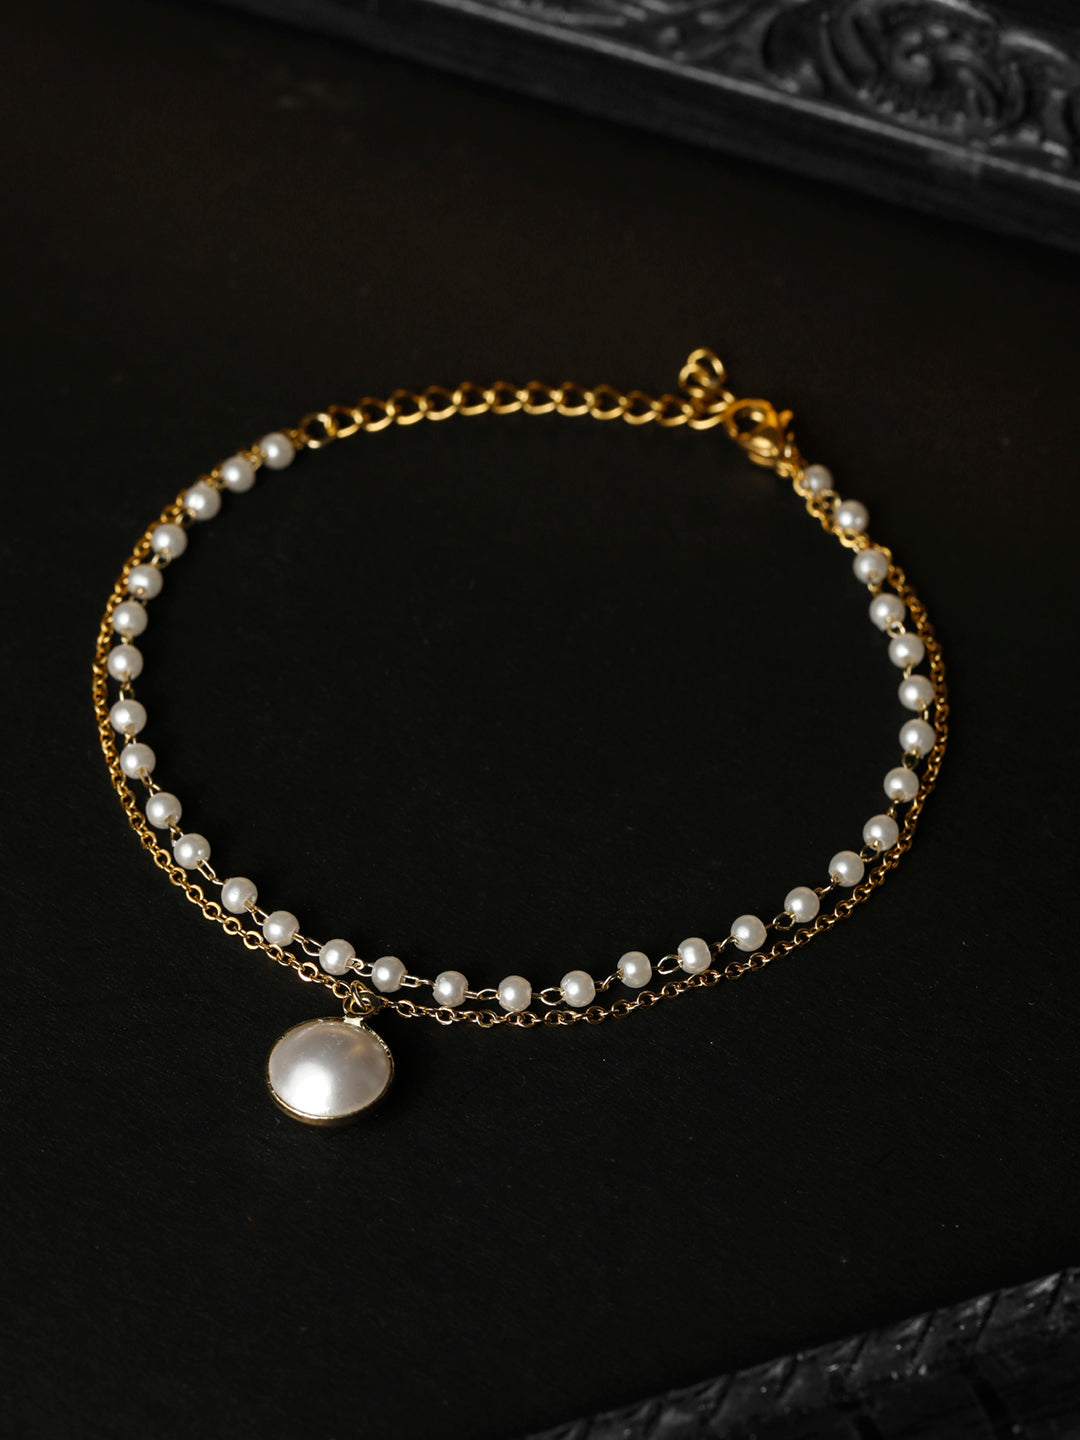 White Pearls & Beads Gold Plated Link Bracelet